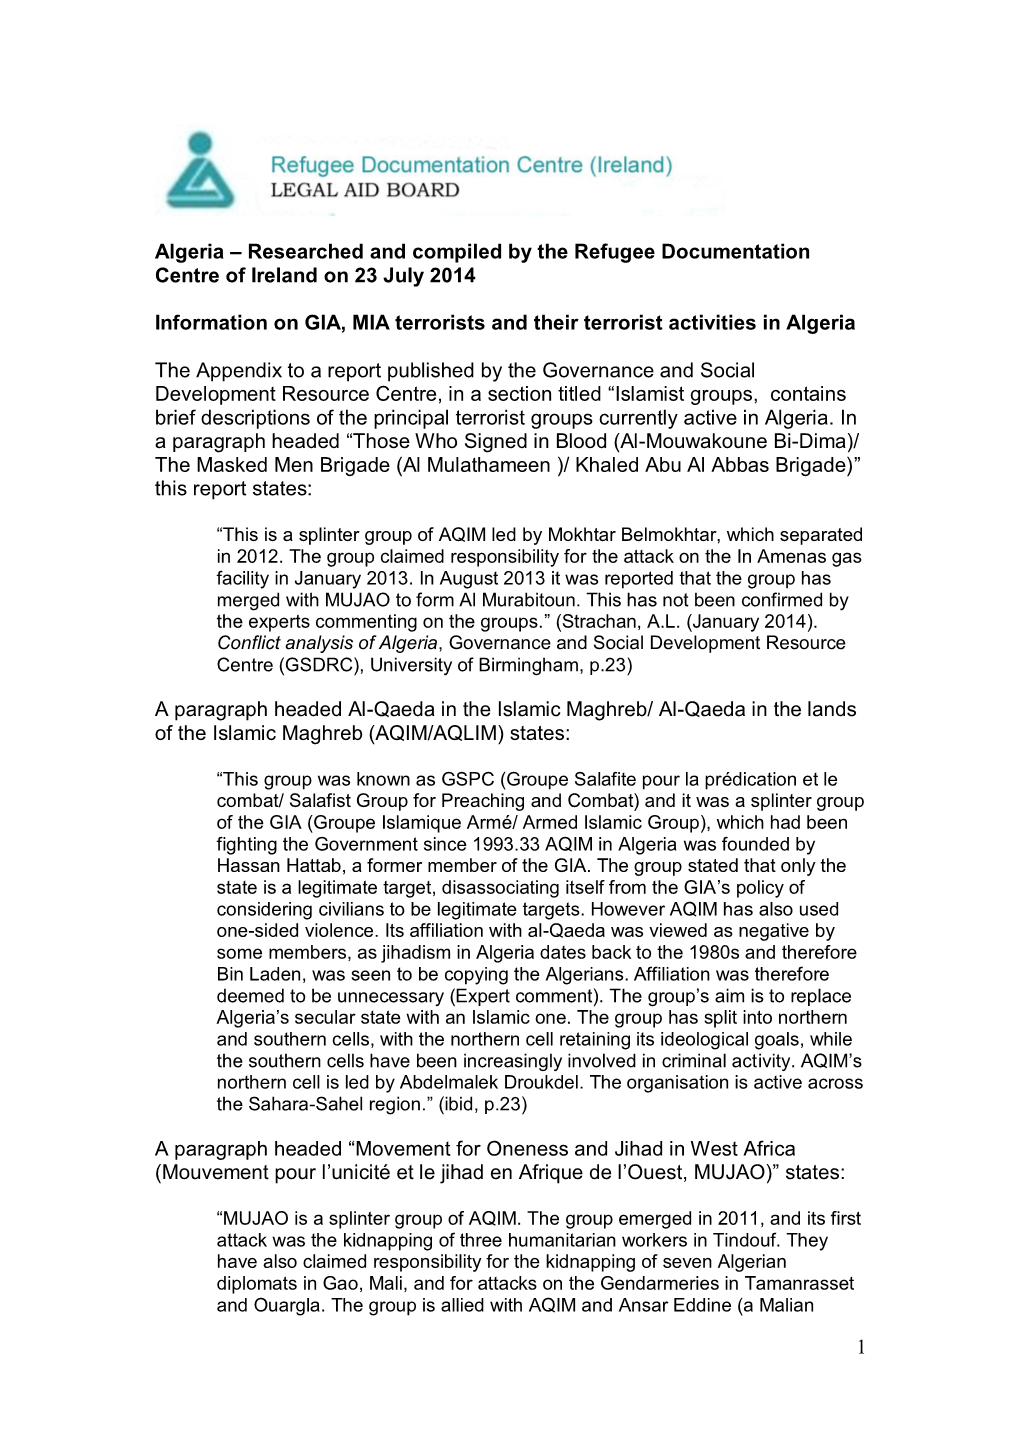 Researched and Compiled by the Refugee Documentation Centre of Ireland on 23 July 2014 Information on GIA, MIA